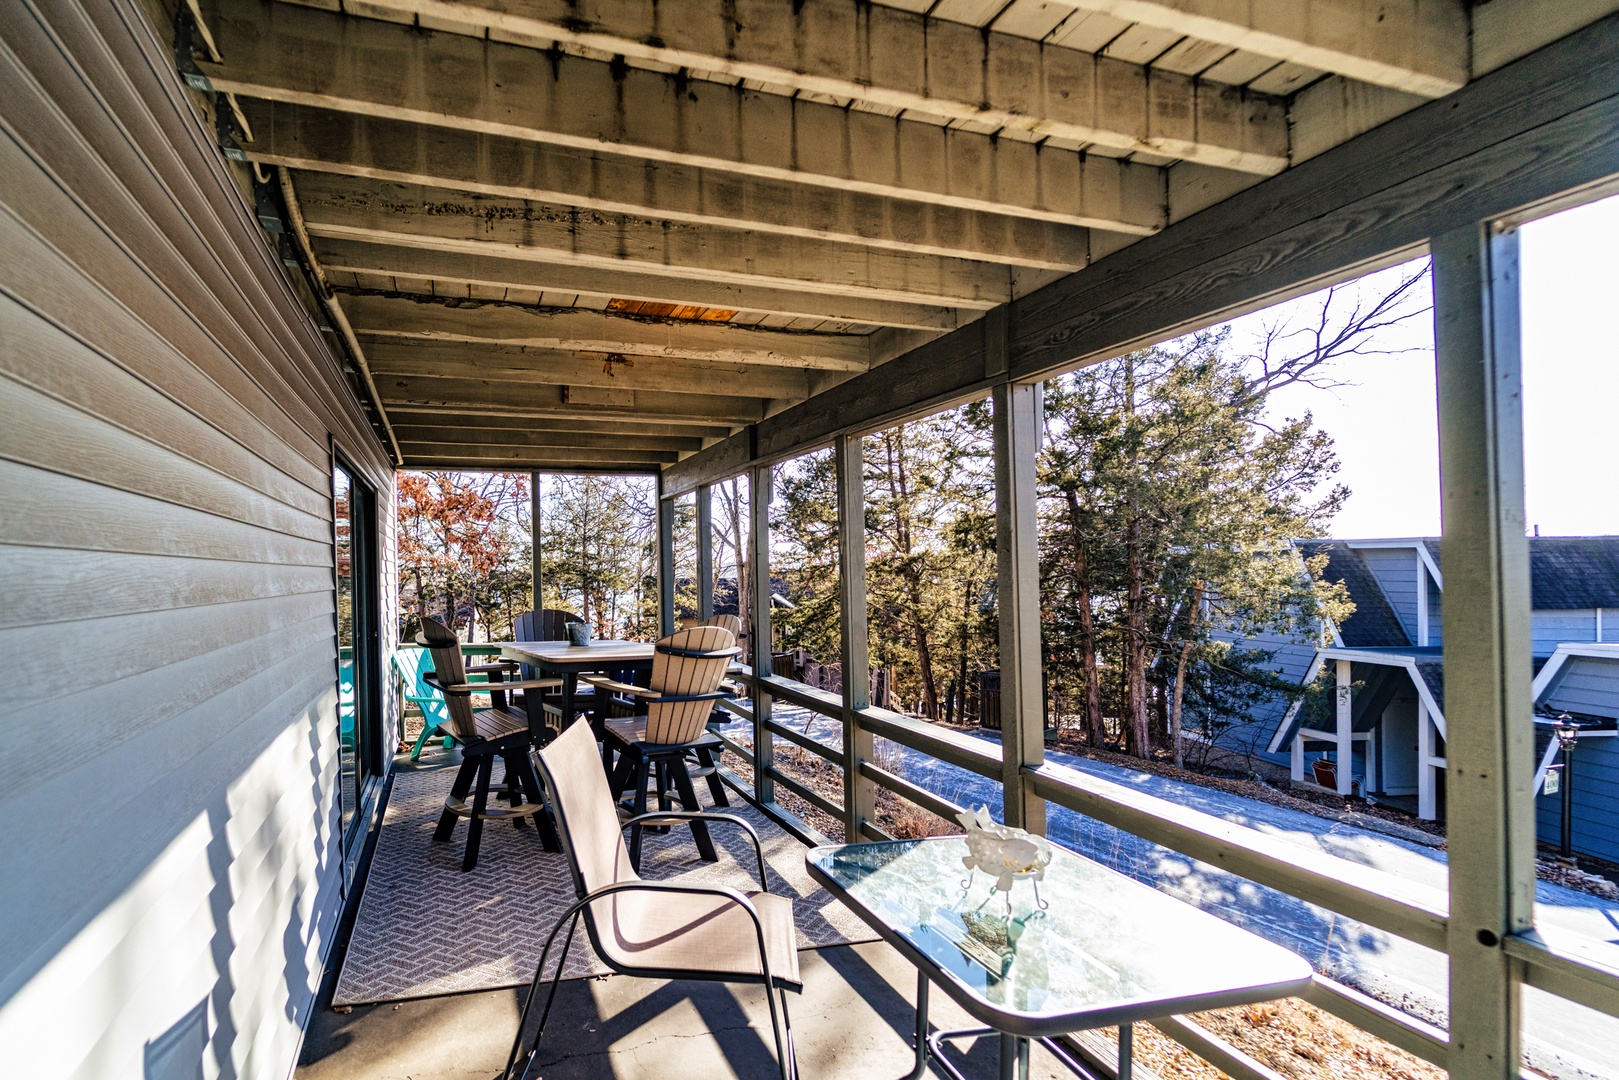 Bask in the fresh air and sunshine on the communal back deck